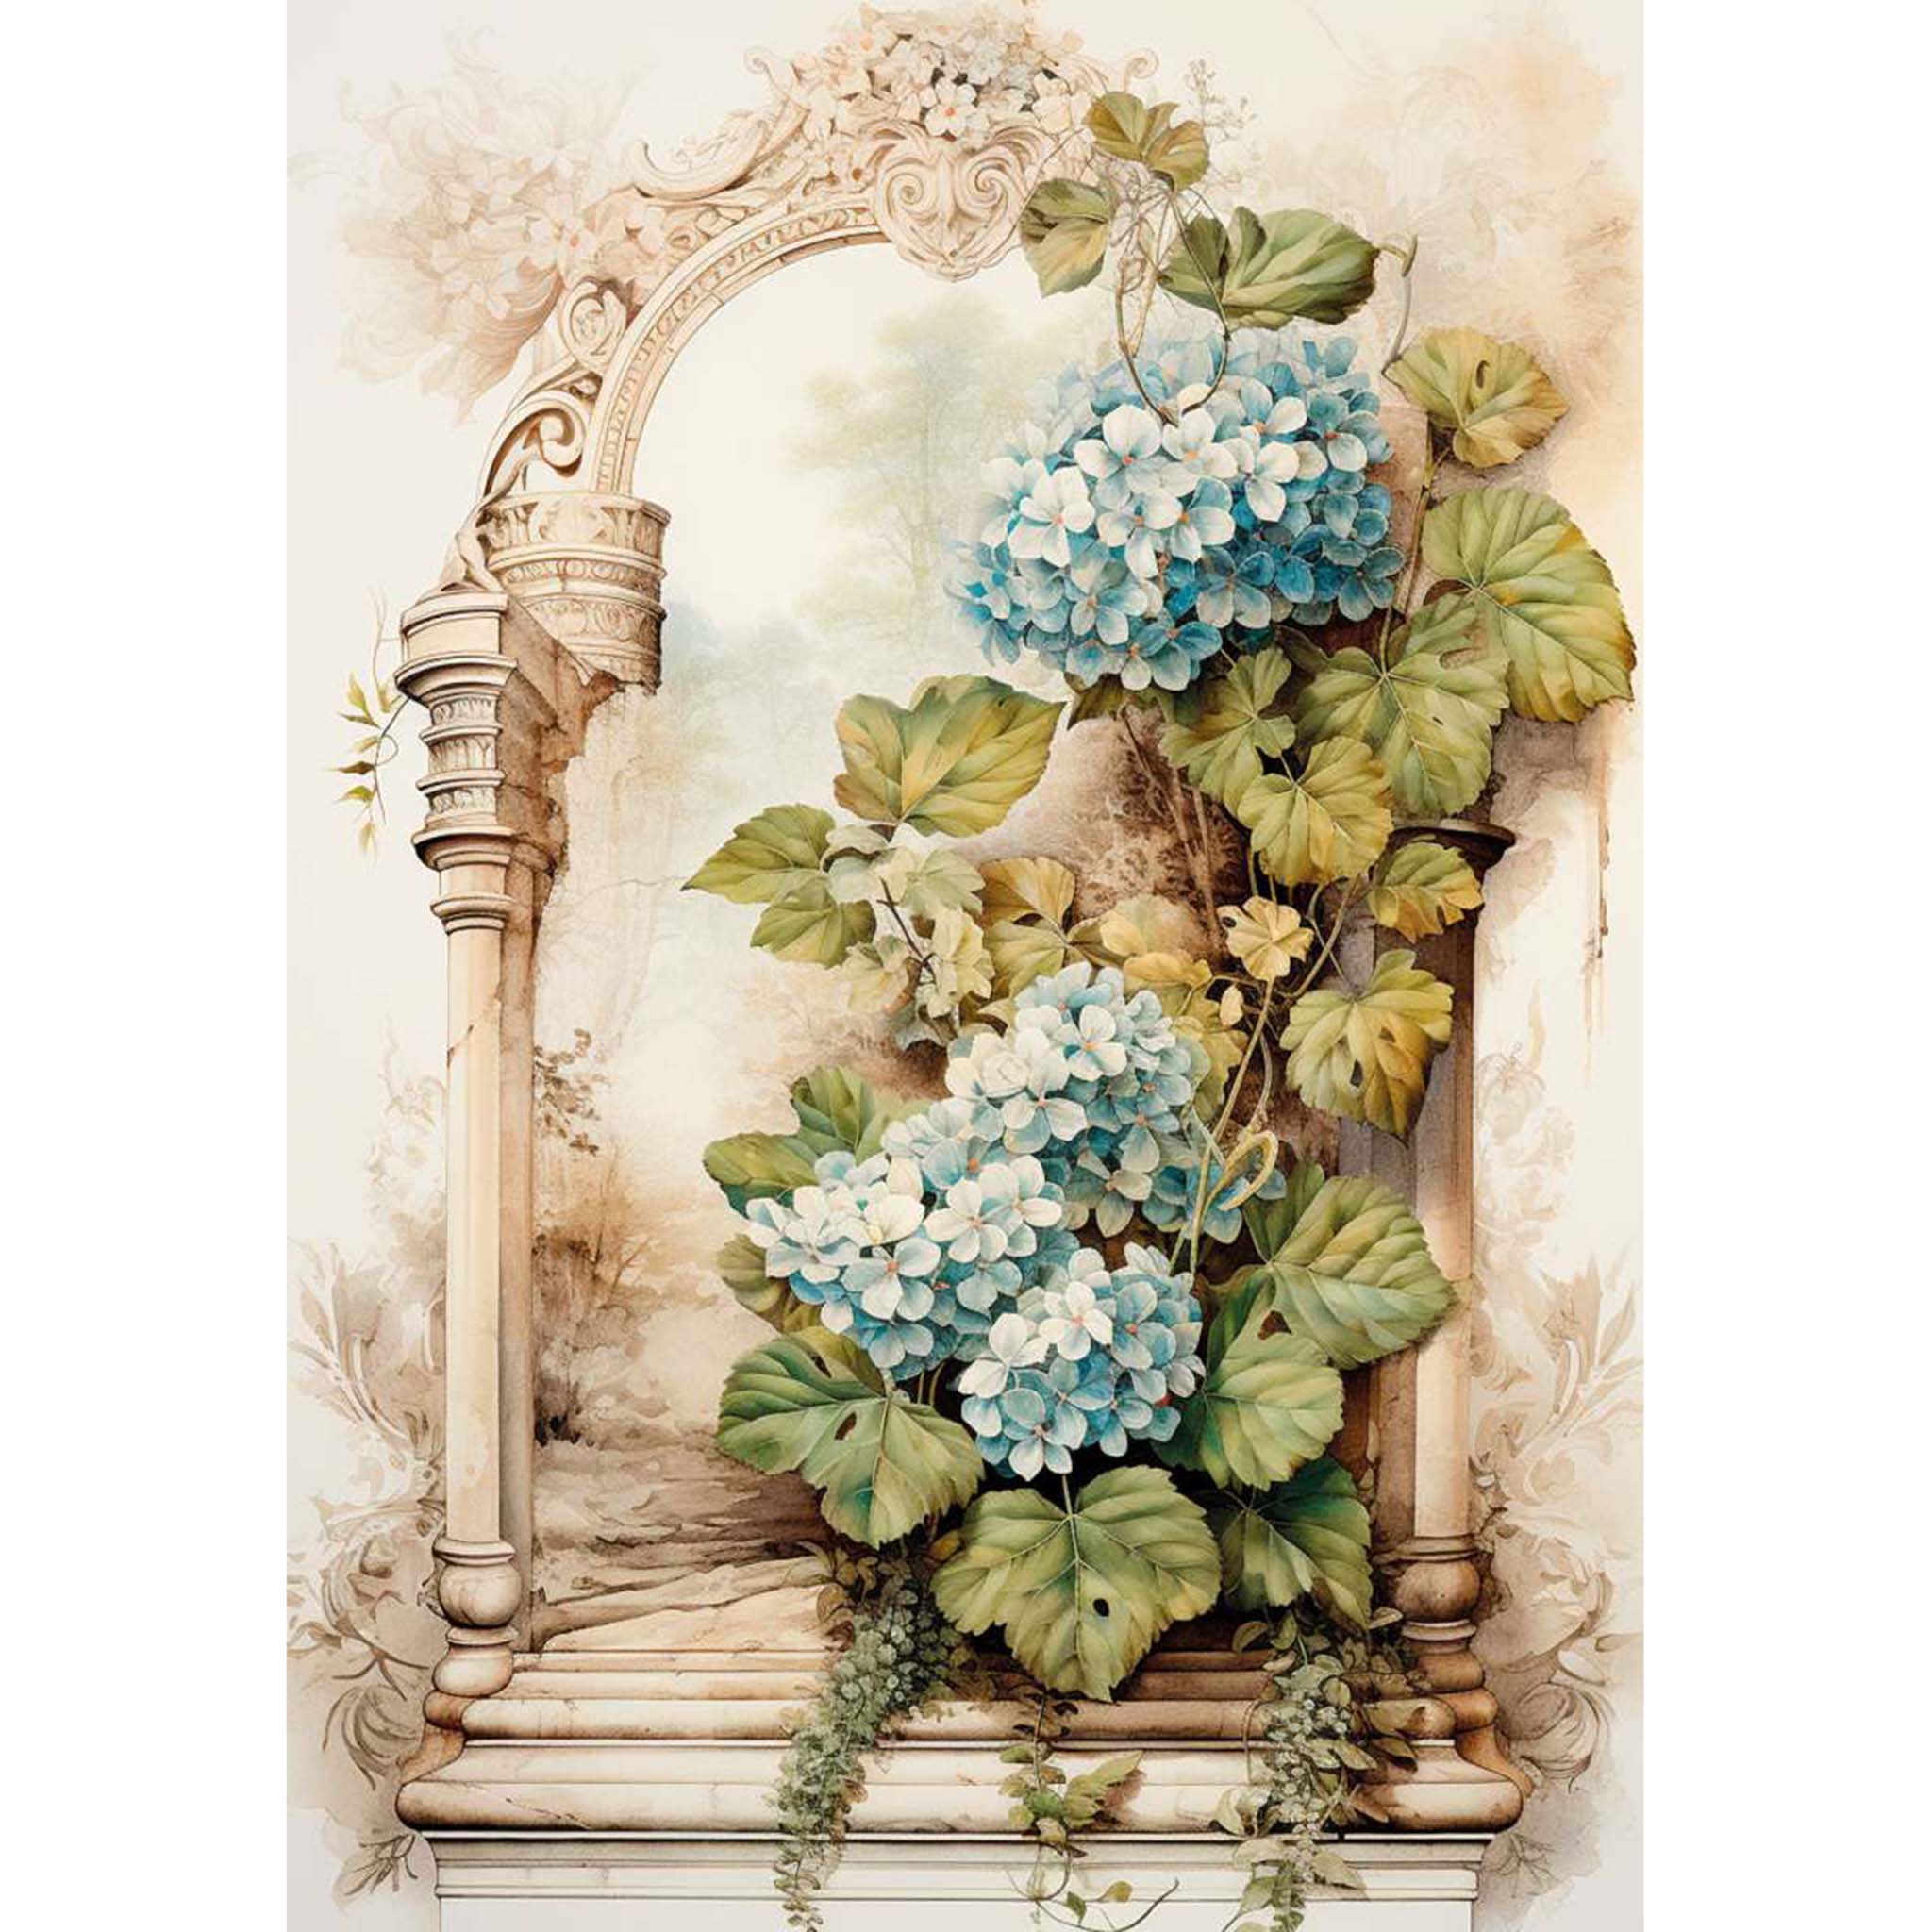 A4 Plus rice paper design that features blue hydrangeas in front of an rustic old world arch. White borders are on the sides.